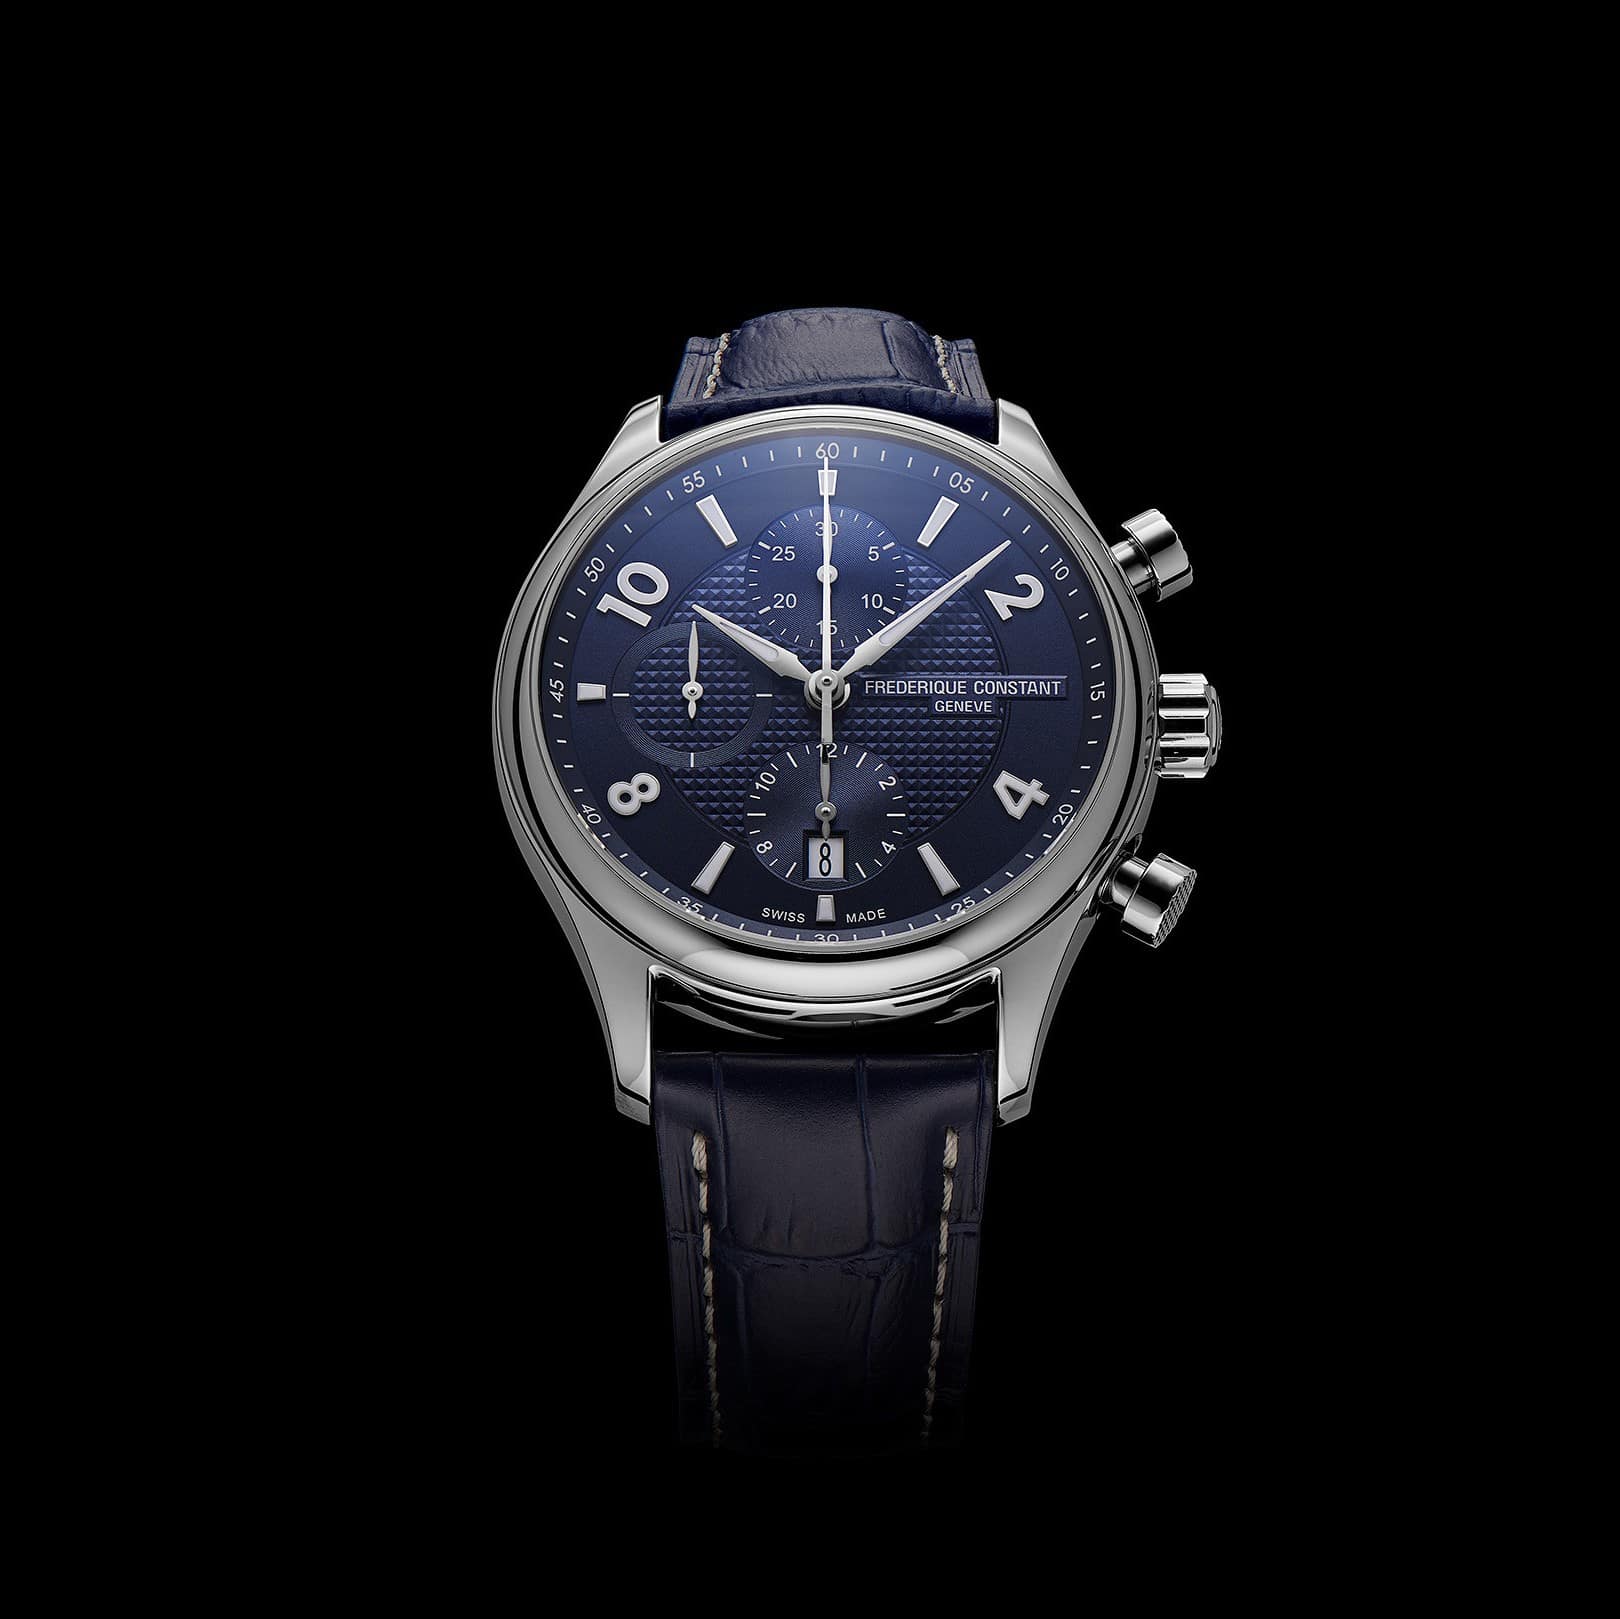 THE RUNABOUT CHRONOGRAPH AUTOMATIC HAS TWO NEW MARITIME VARIATIONS